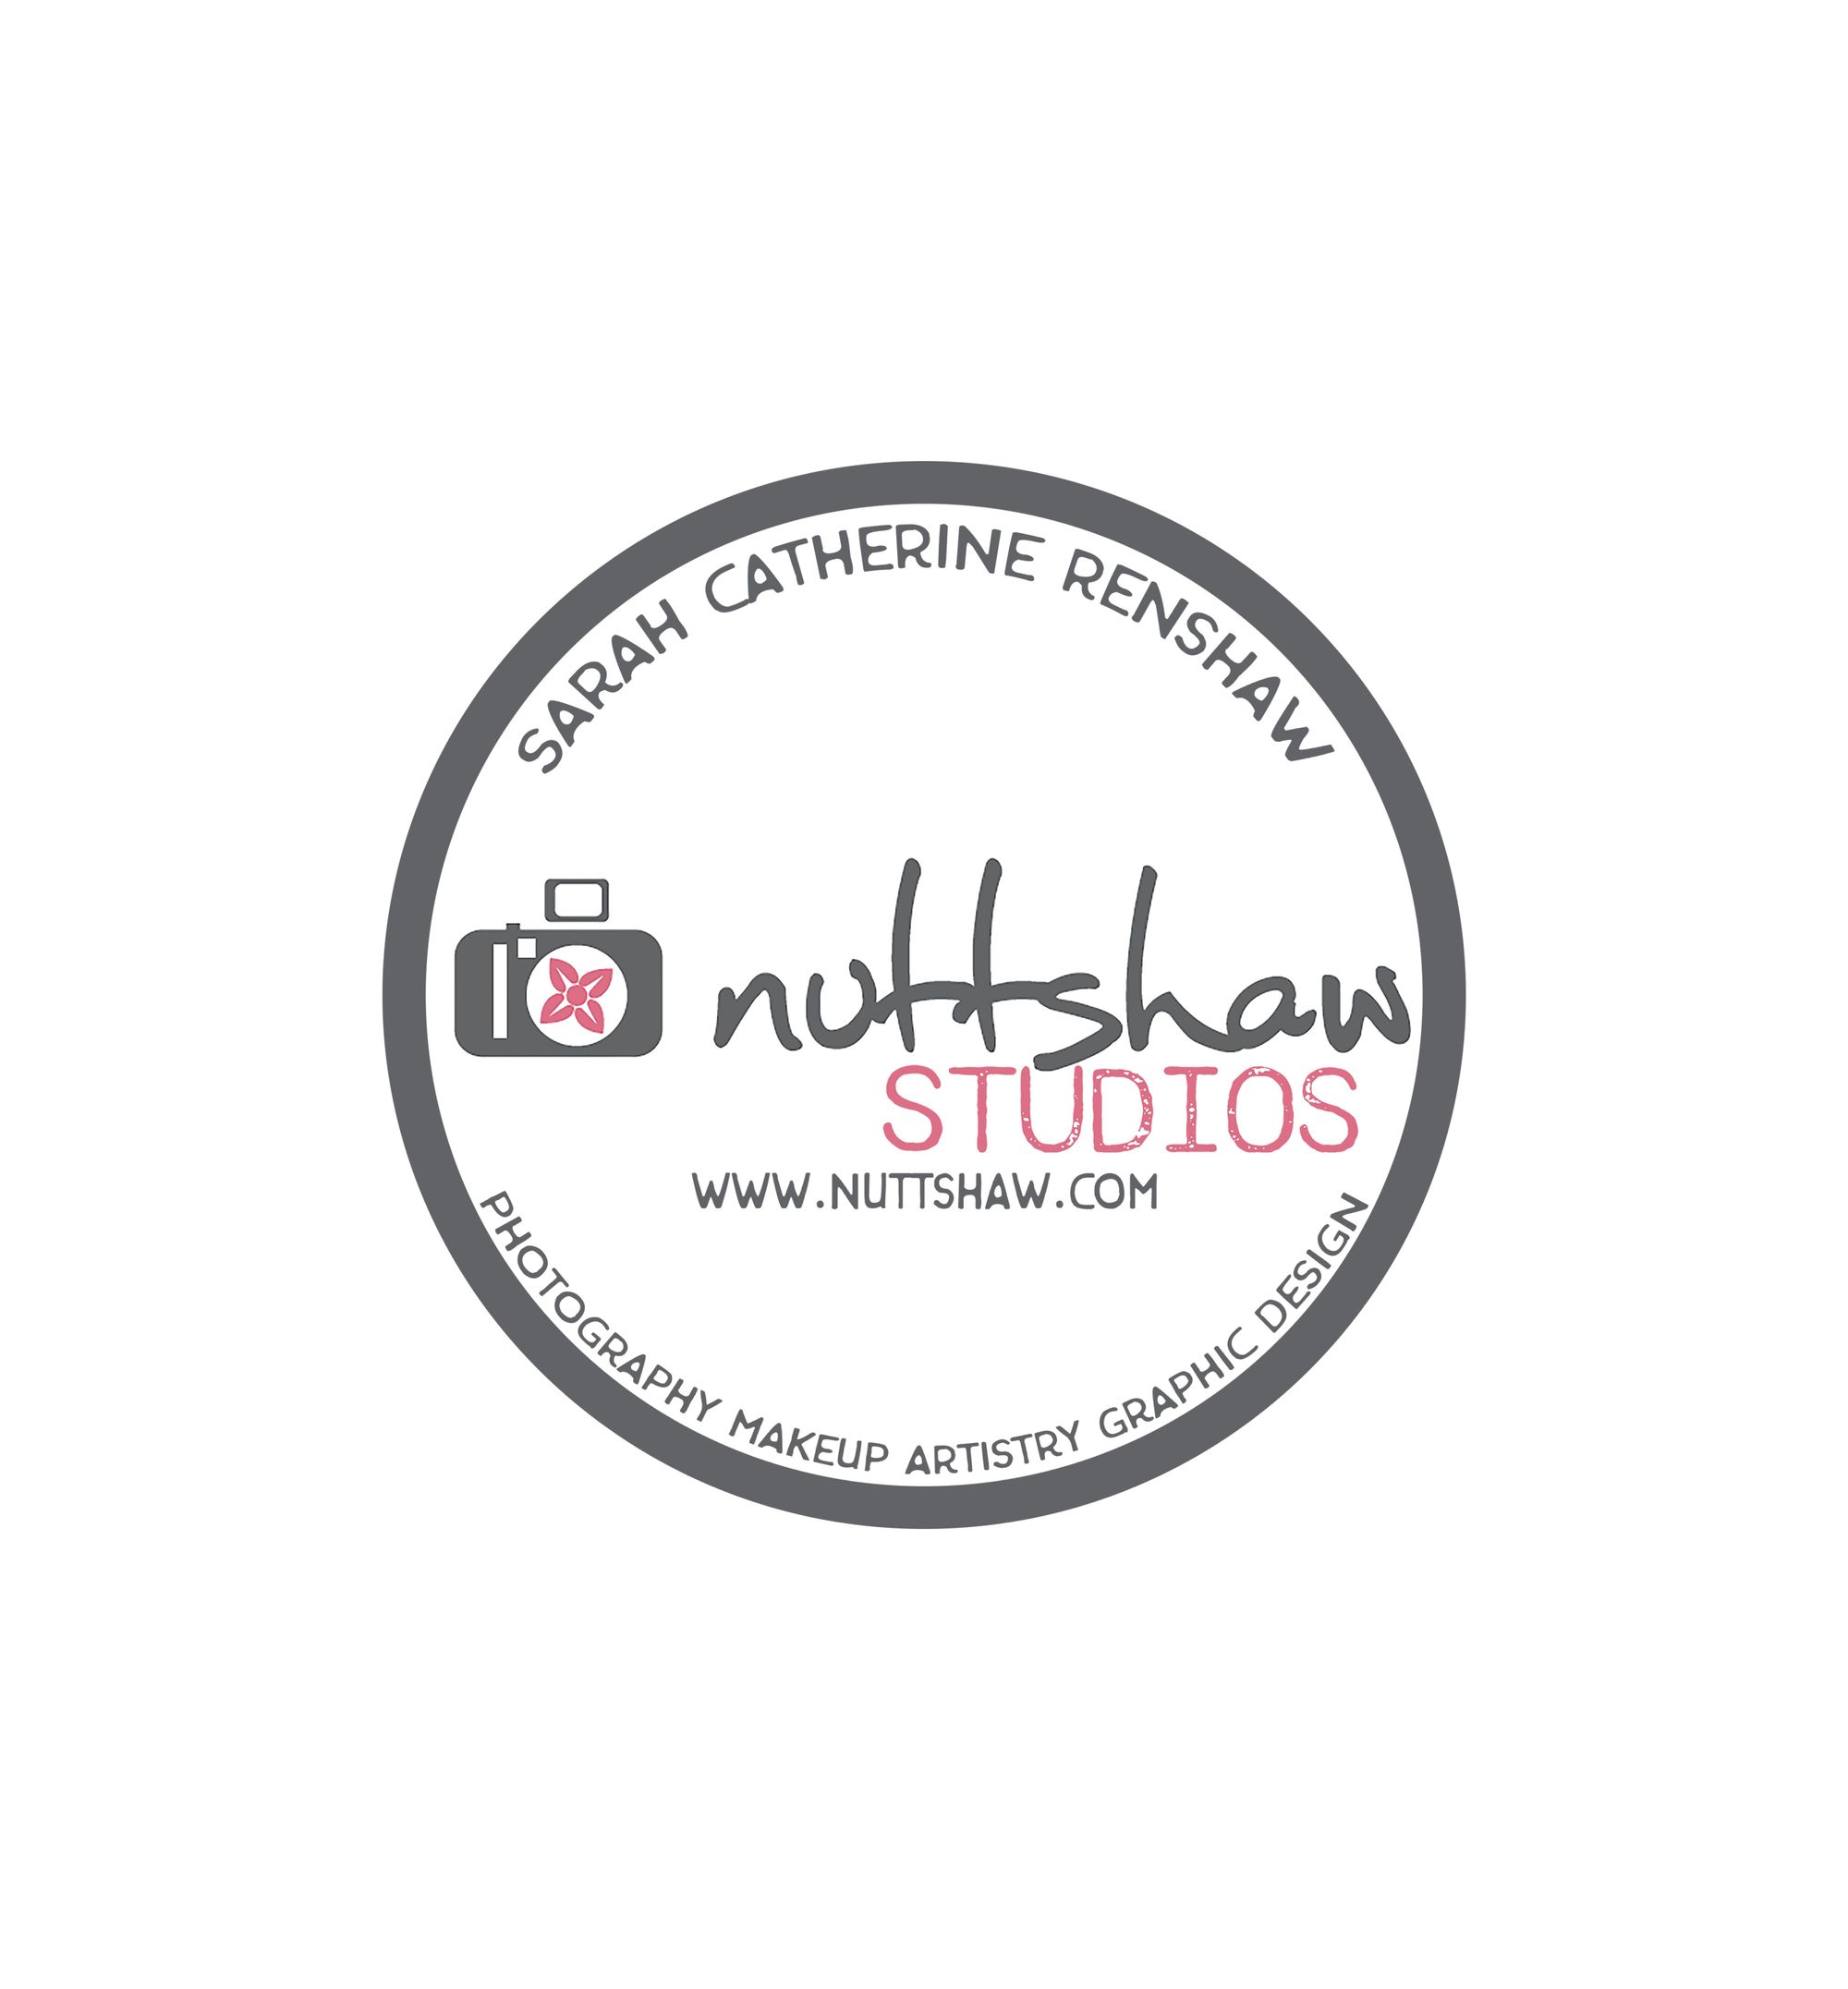 Photography, Makeup, Graphic Design & More - Nuttshaw Studios